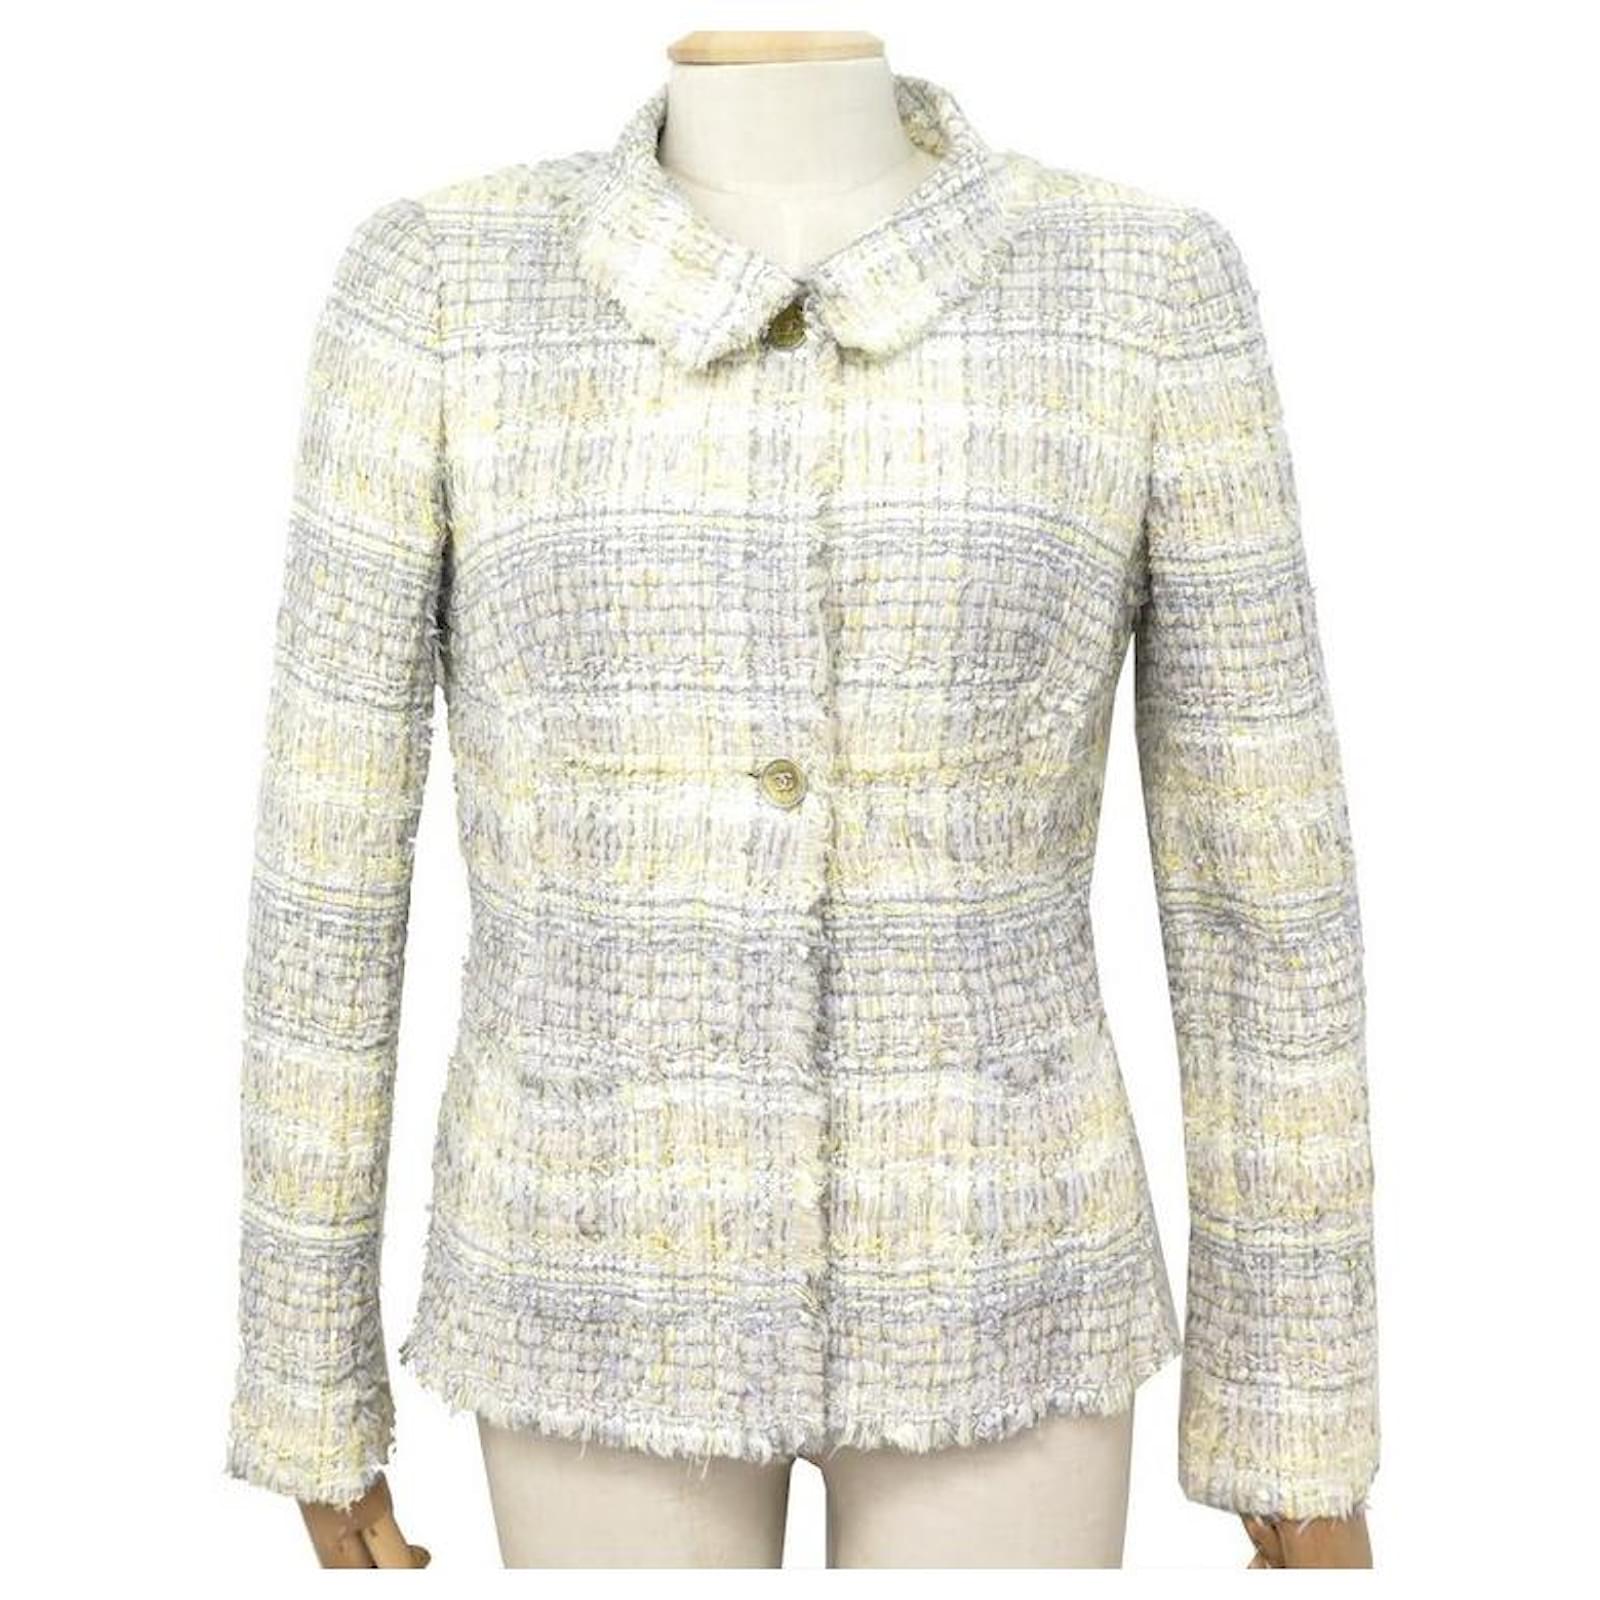 NEW CHANEL JACKET SIZE S 36 IN YELLOW TWEED BUTTONS CC LOGO JACKET VEST